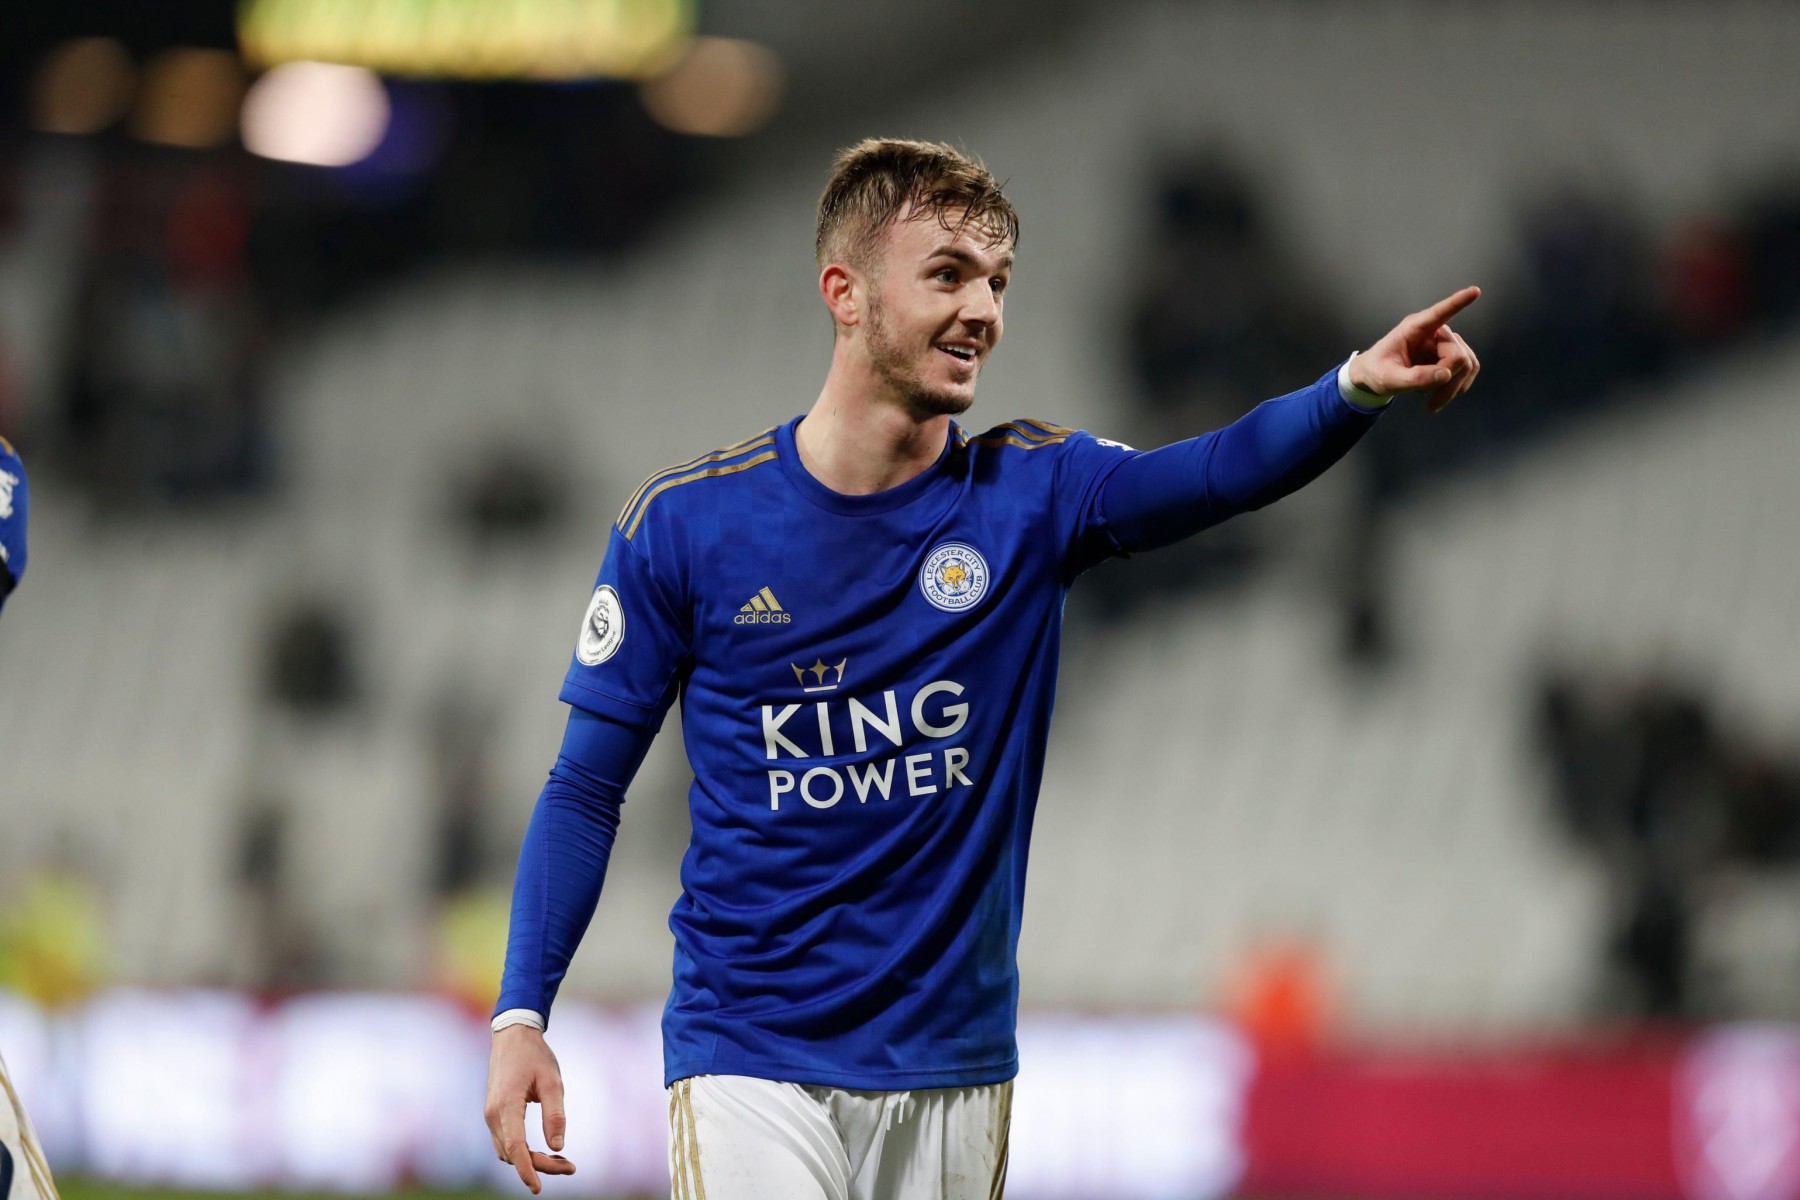 , Football betting tips: Maddison to score against Chelsea, Fernandes debut goal and Son to star in Man City goalfest